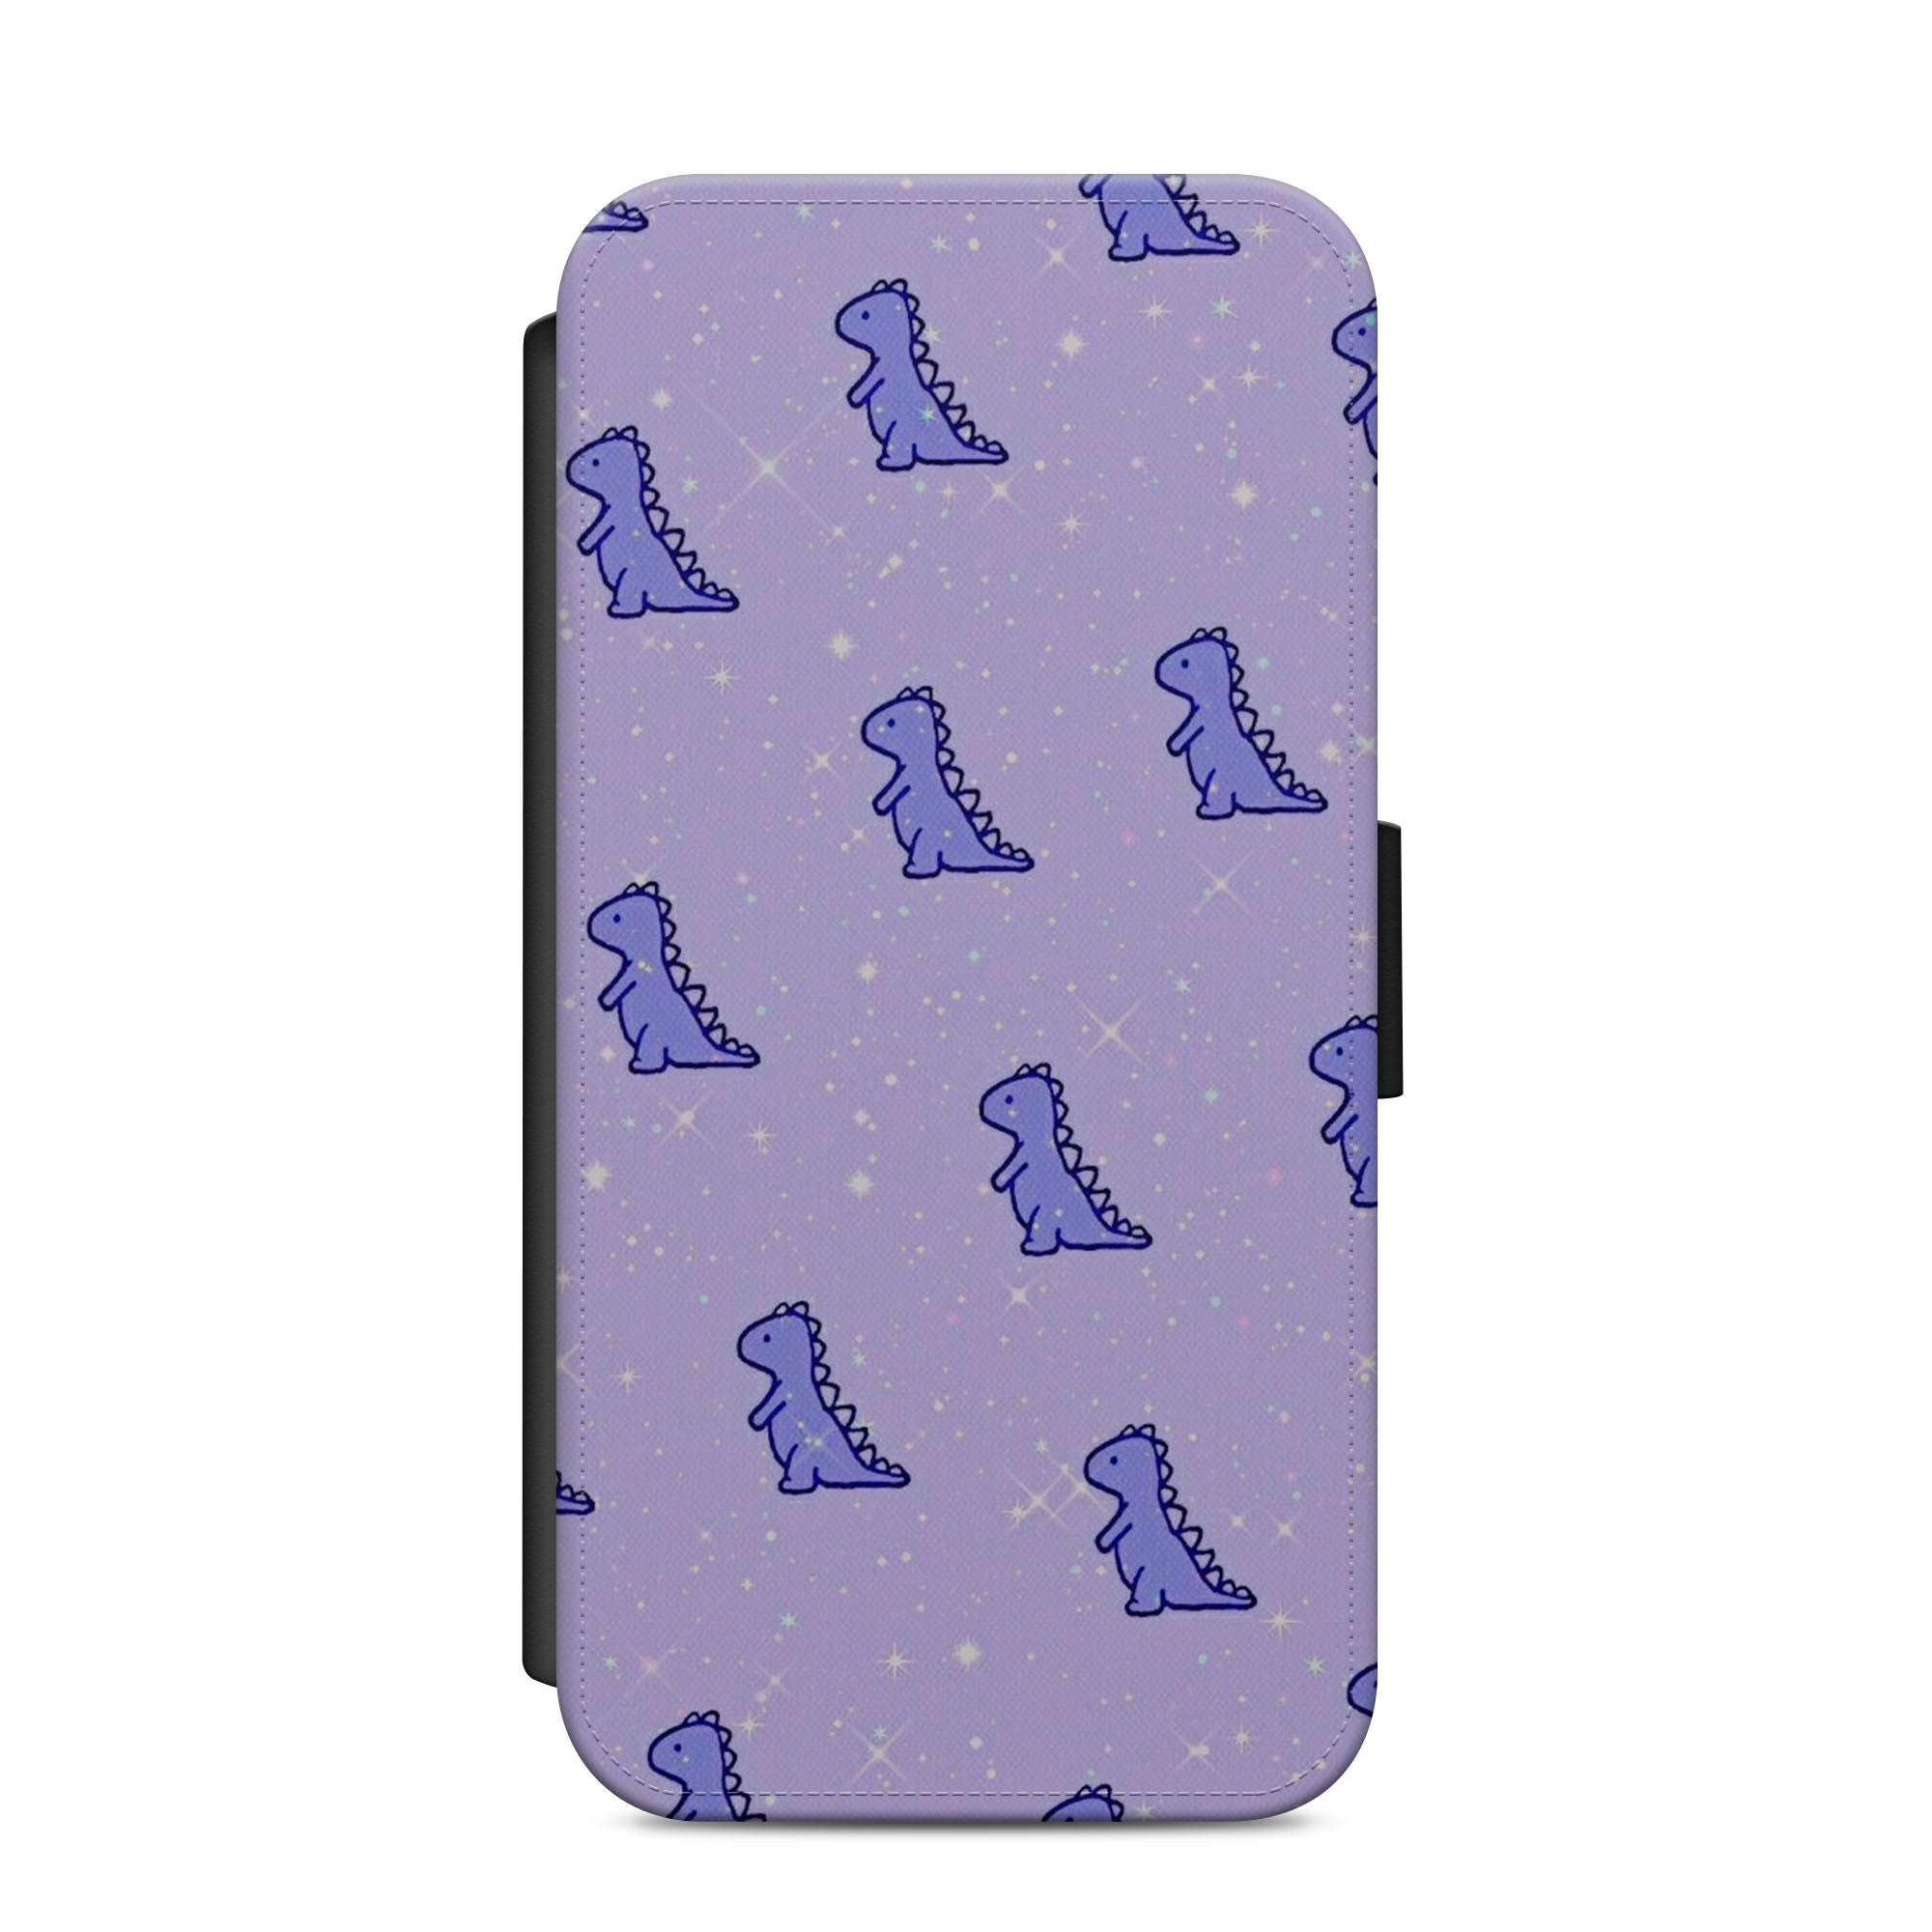 Cute Pastel Dino Dinosaur Faux Leather Flip Case Wallet for iPhone / Samsung